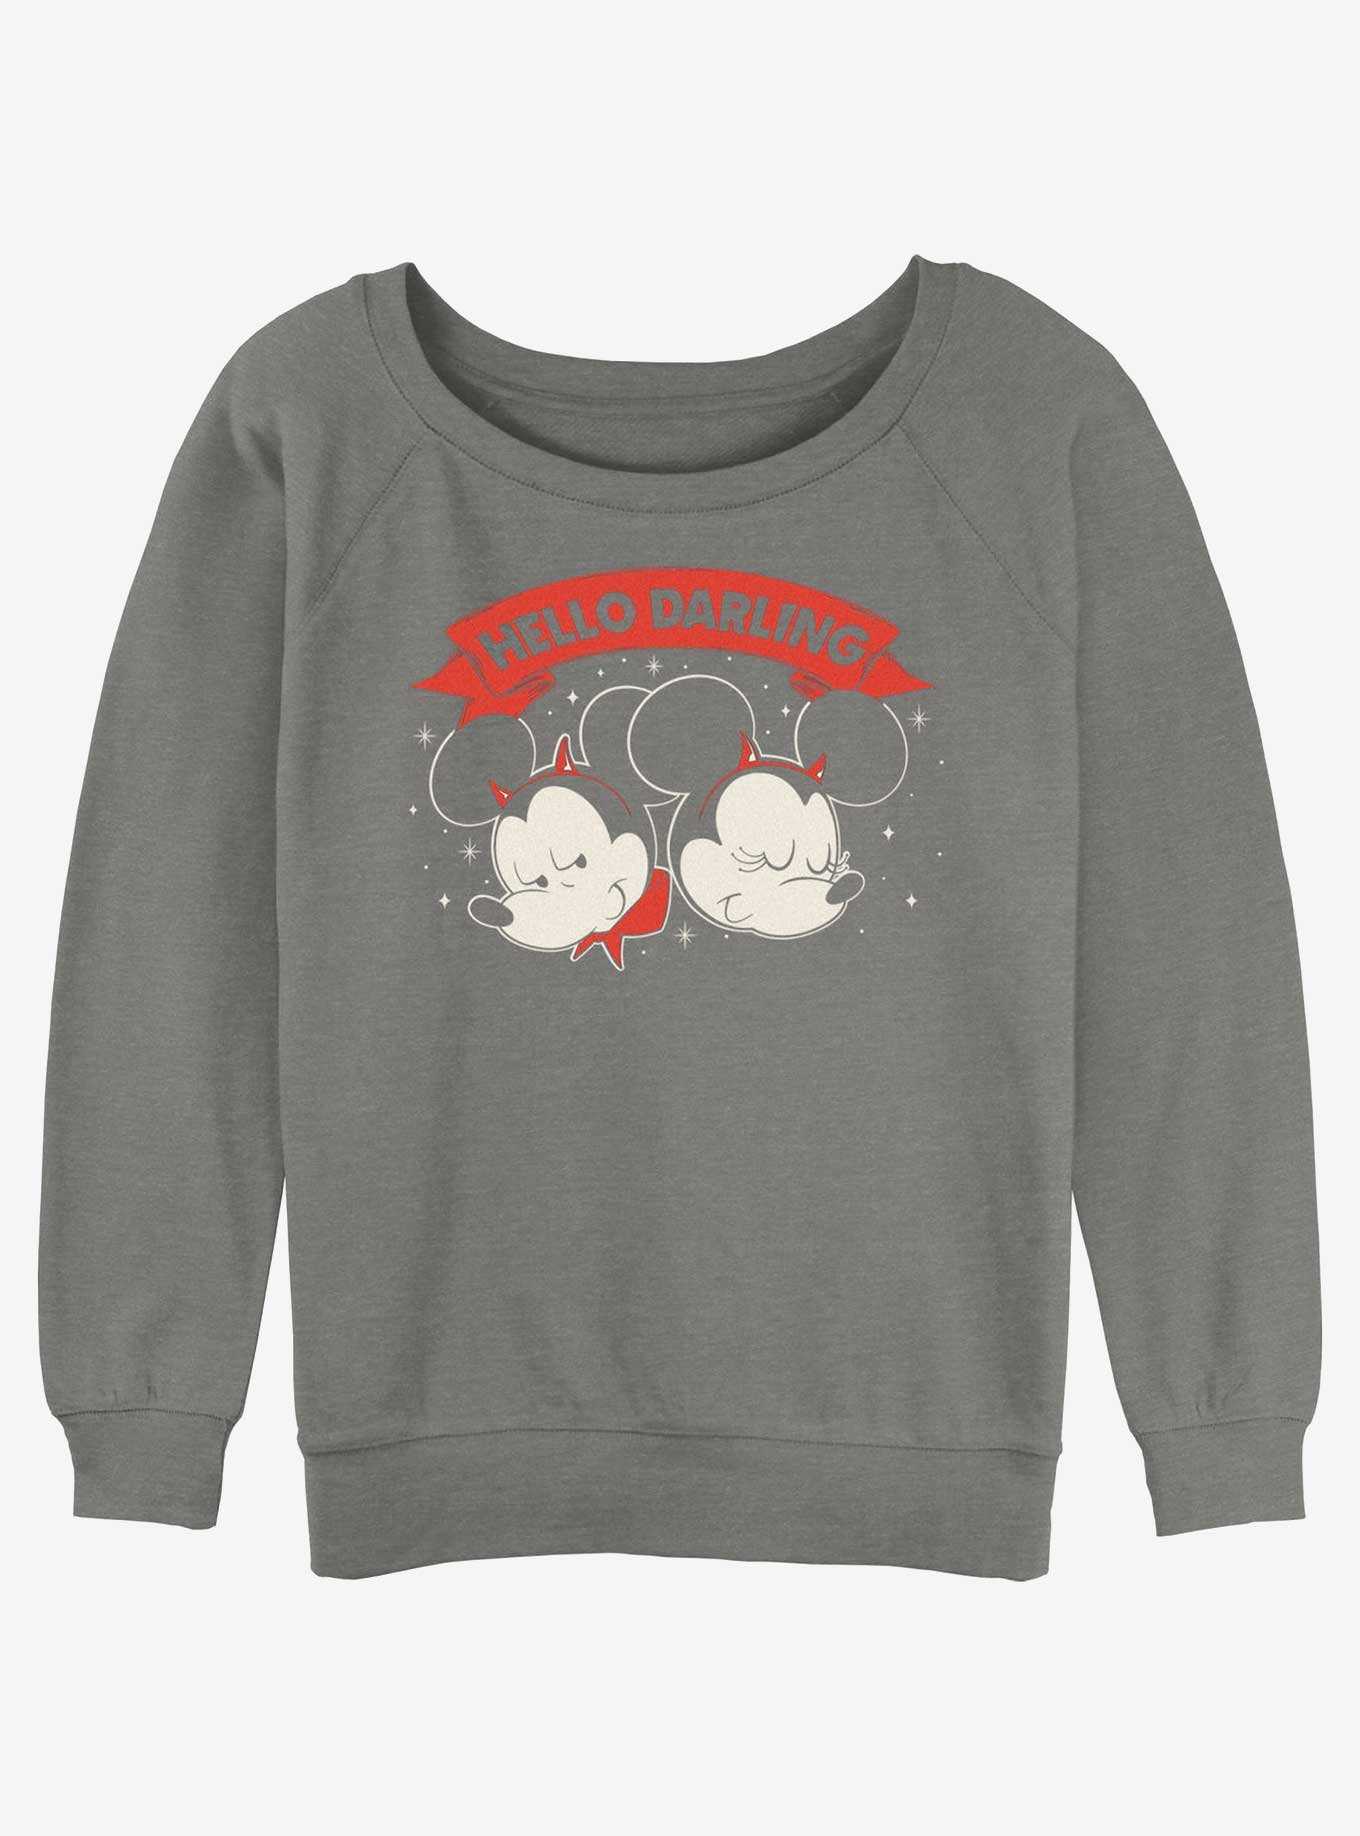 Disney Mickey Mouse & Minnie Mouse Hello Darling Girls Slouchy Sweatshirt, , hi-res